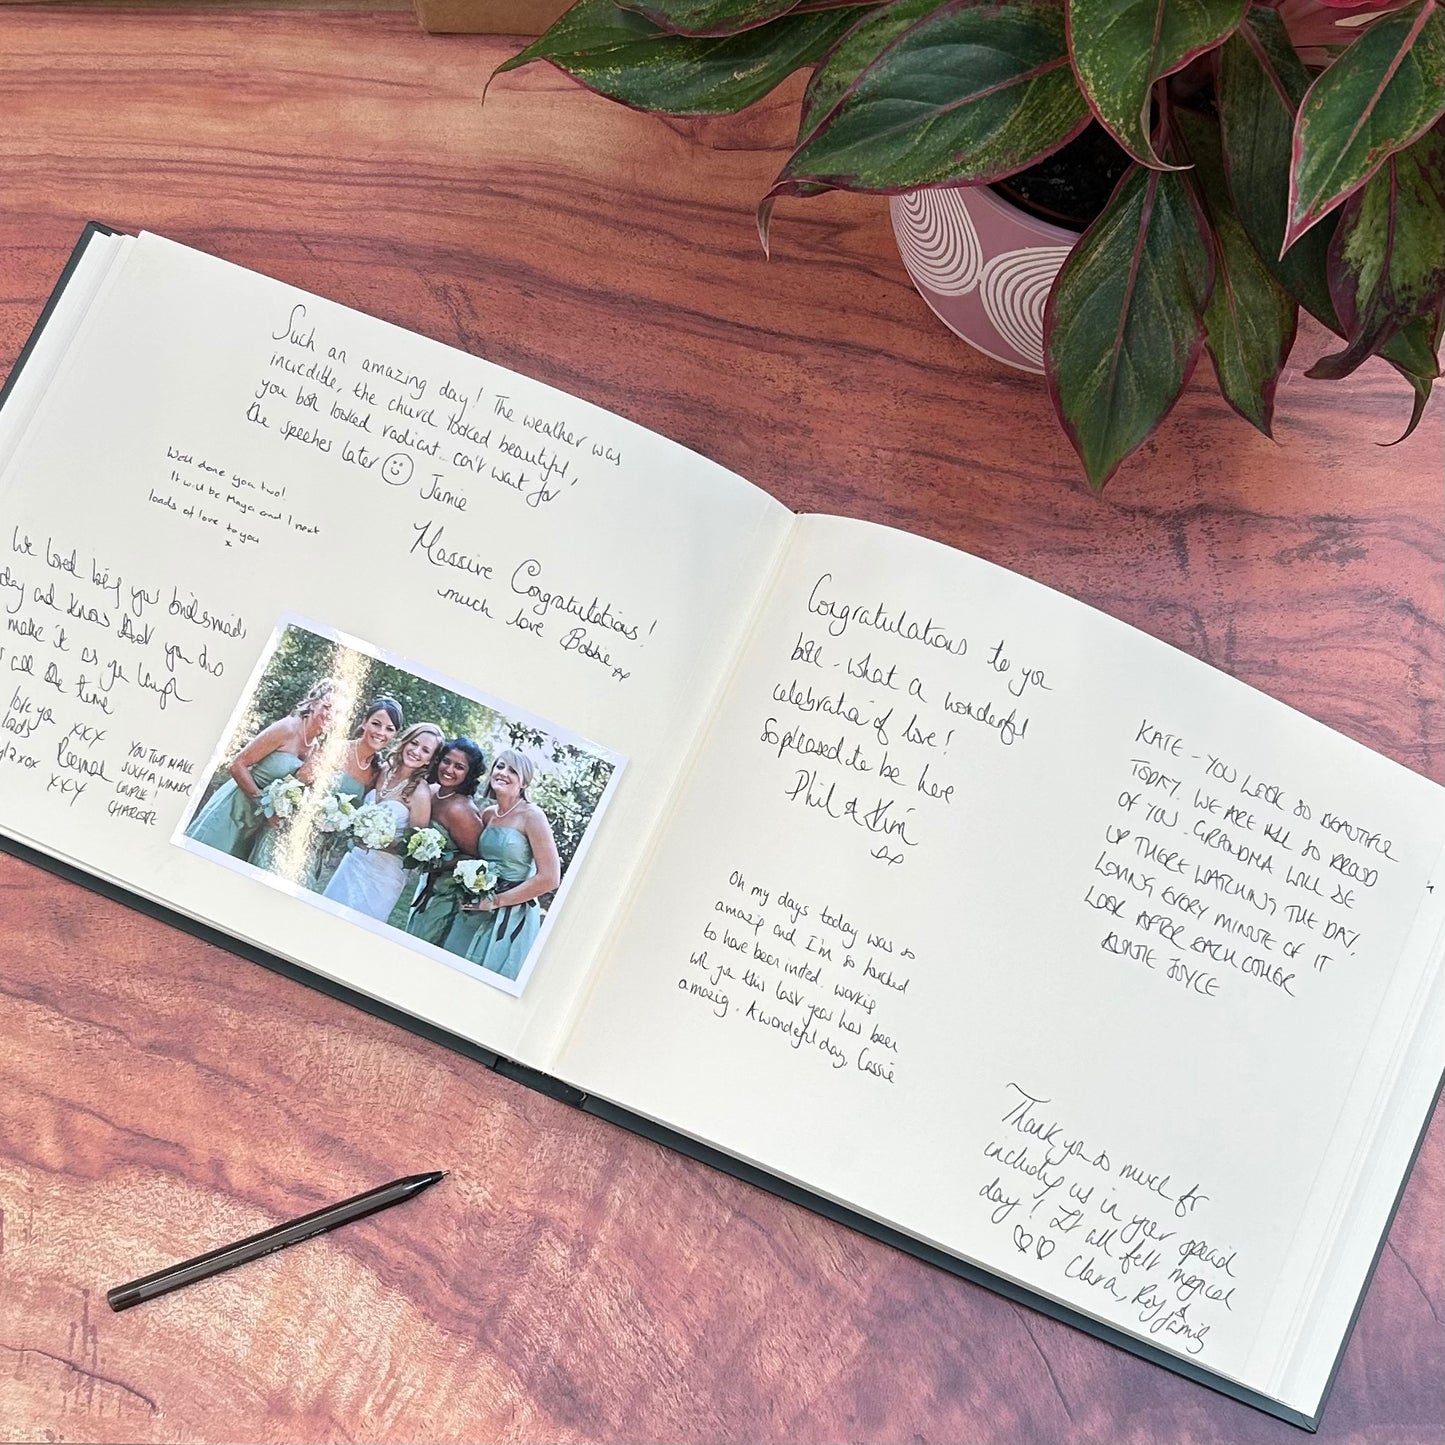 a wedding guest book lies open on a table - full of messages and a photo